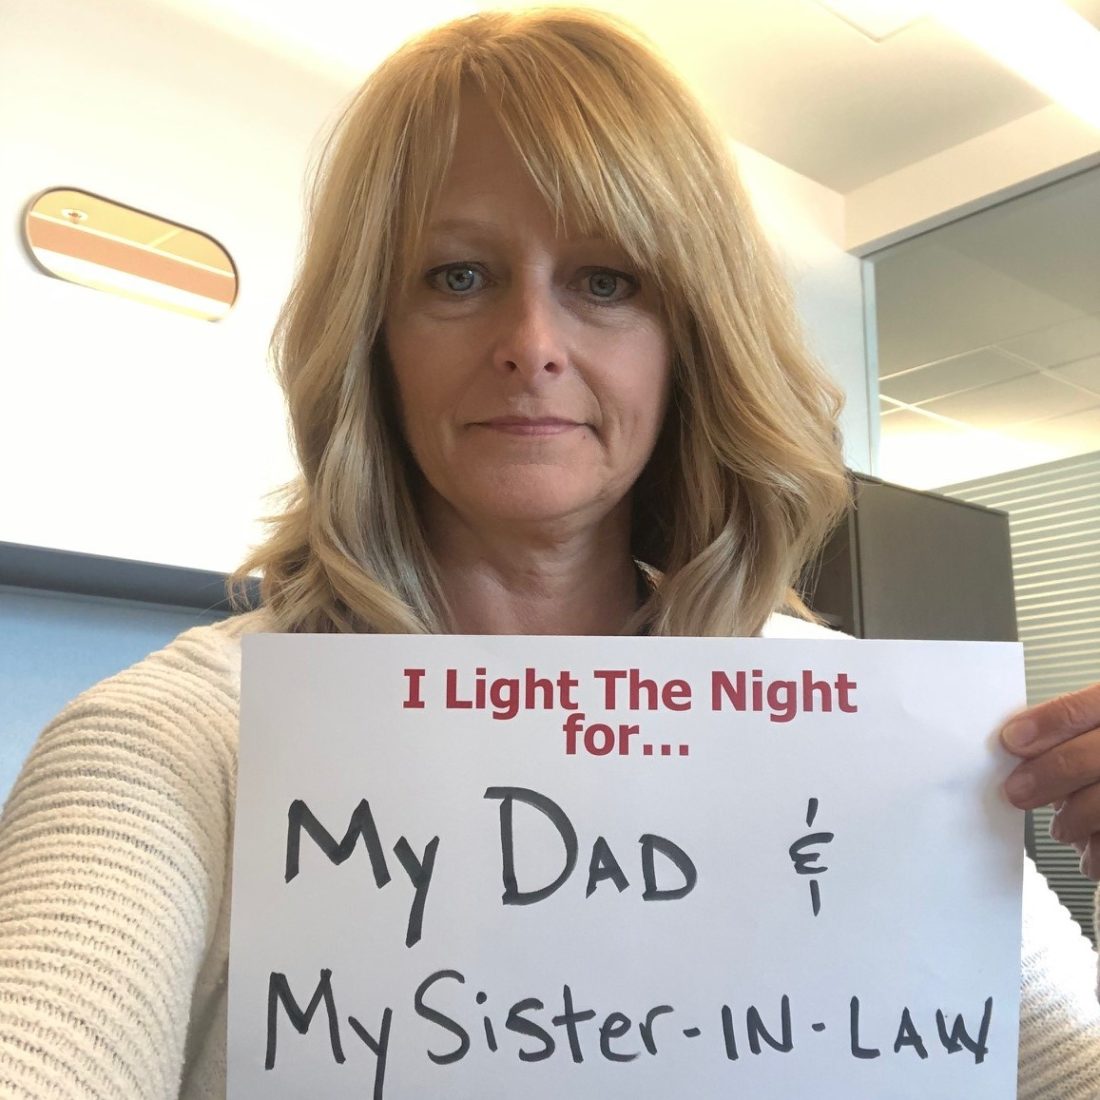 Woman holding sign that says I Light the Night for My Dad and My Sister-in-Law. 